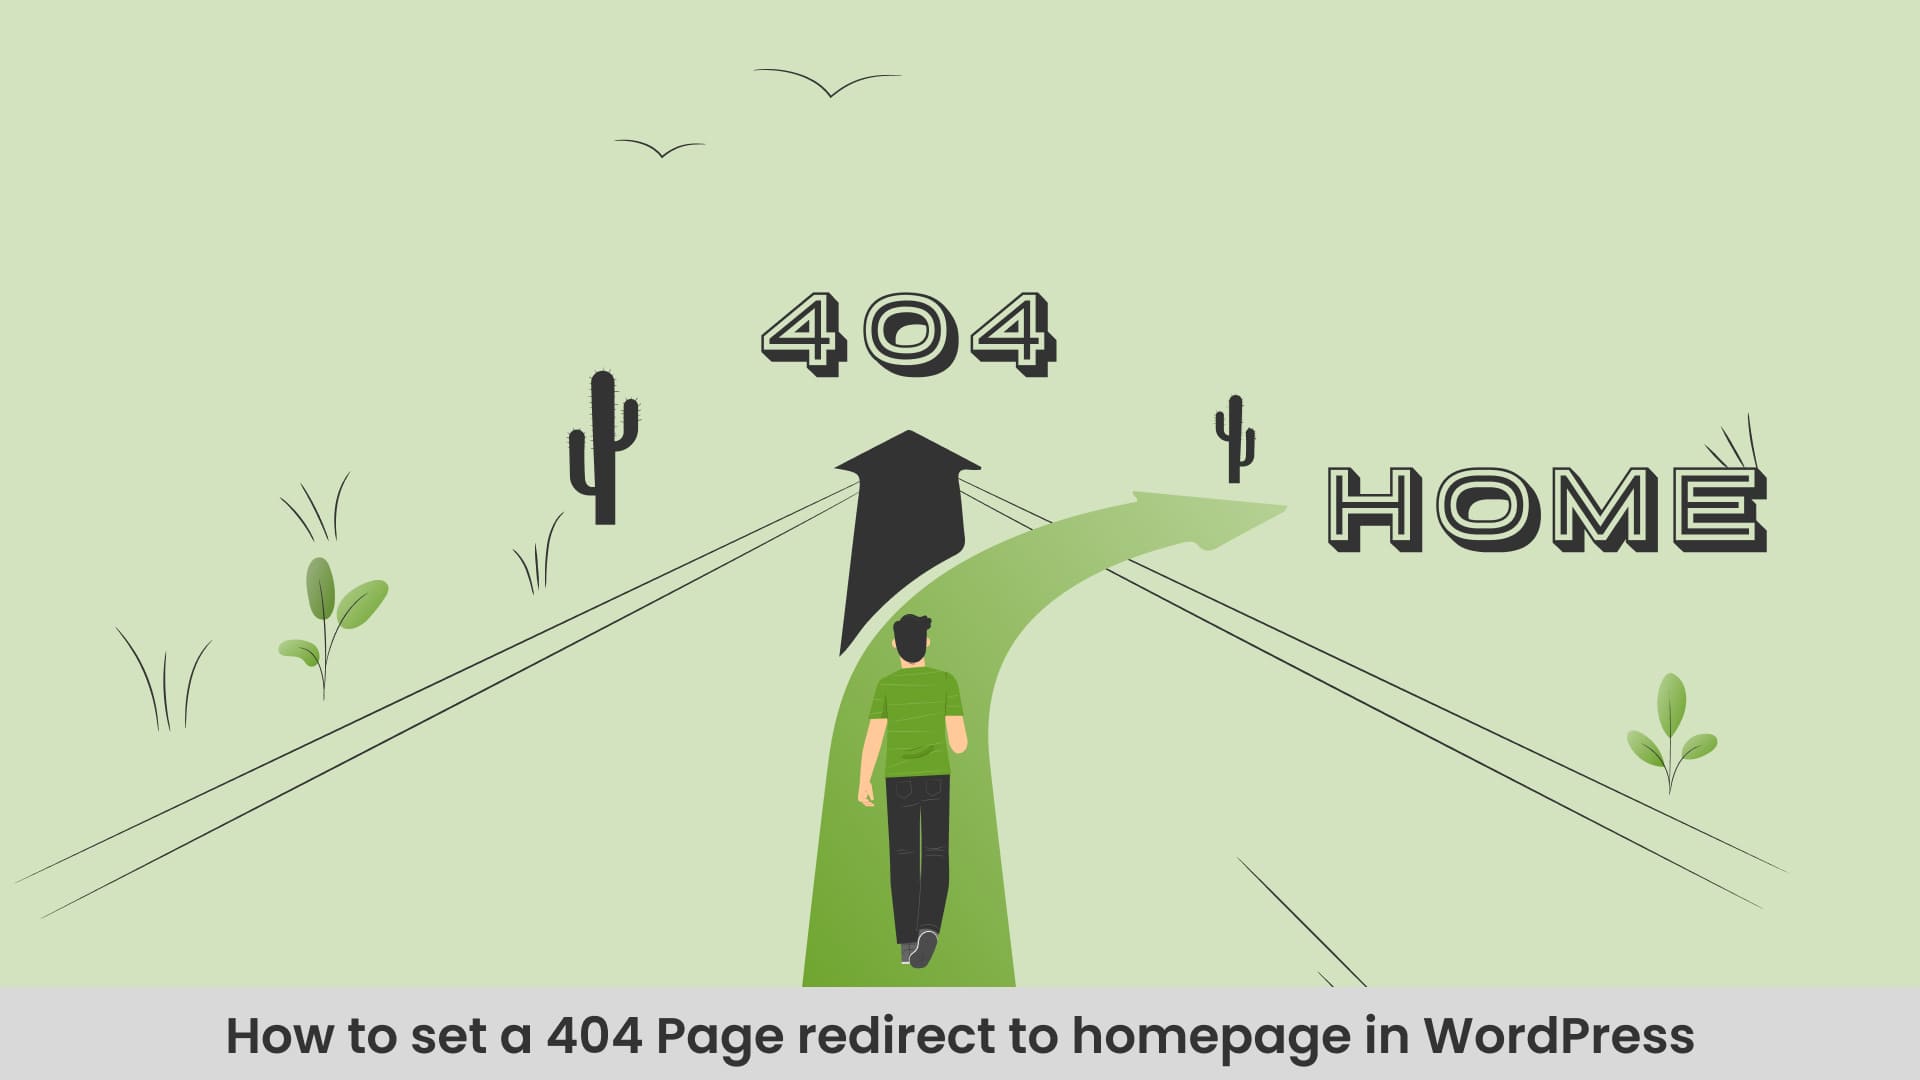 How to set a 404 Pages redirect to homepage in WordPress